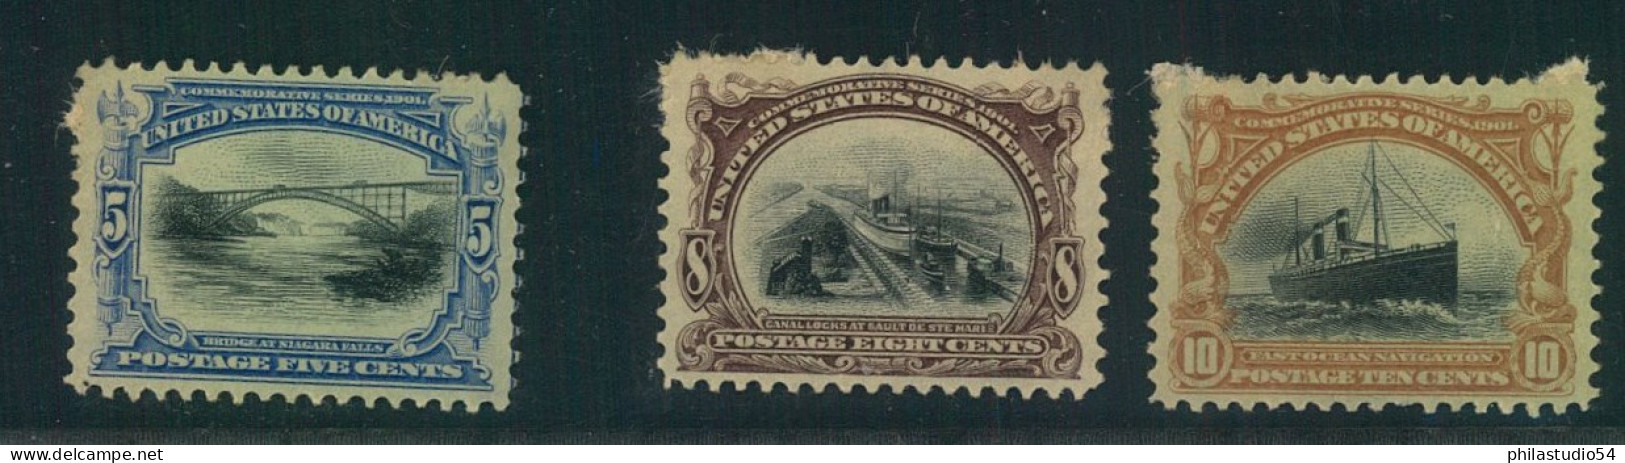 1900, PANAMERICAN EXHIBITION BUFFALO Mint- - Unused Stamps